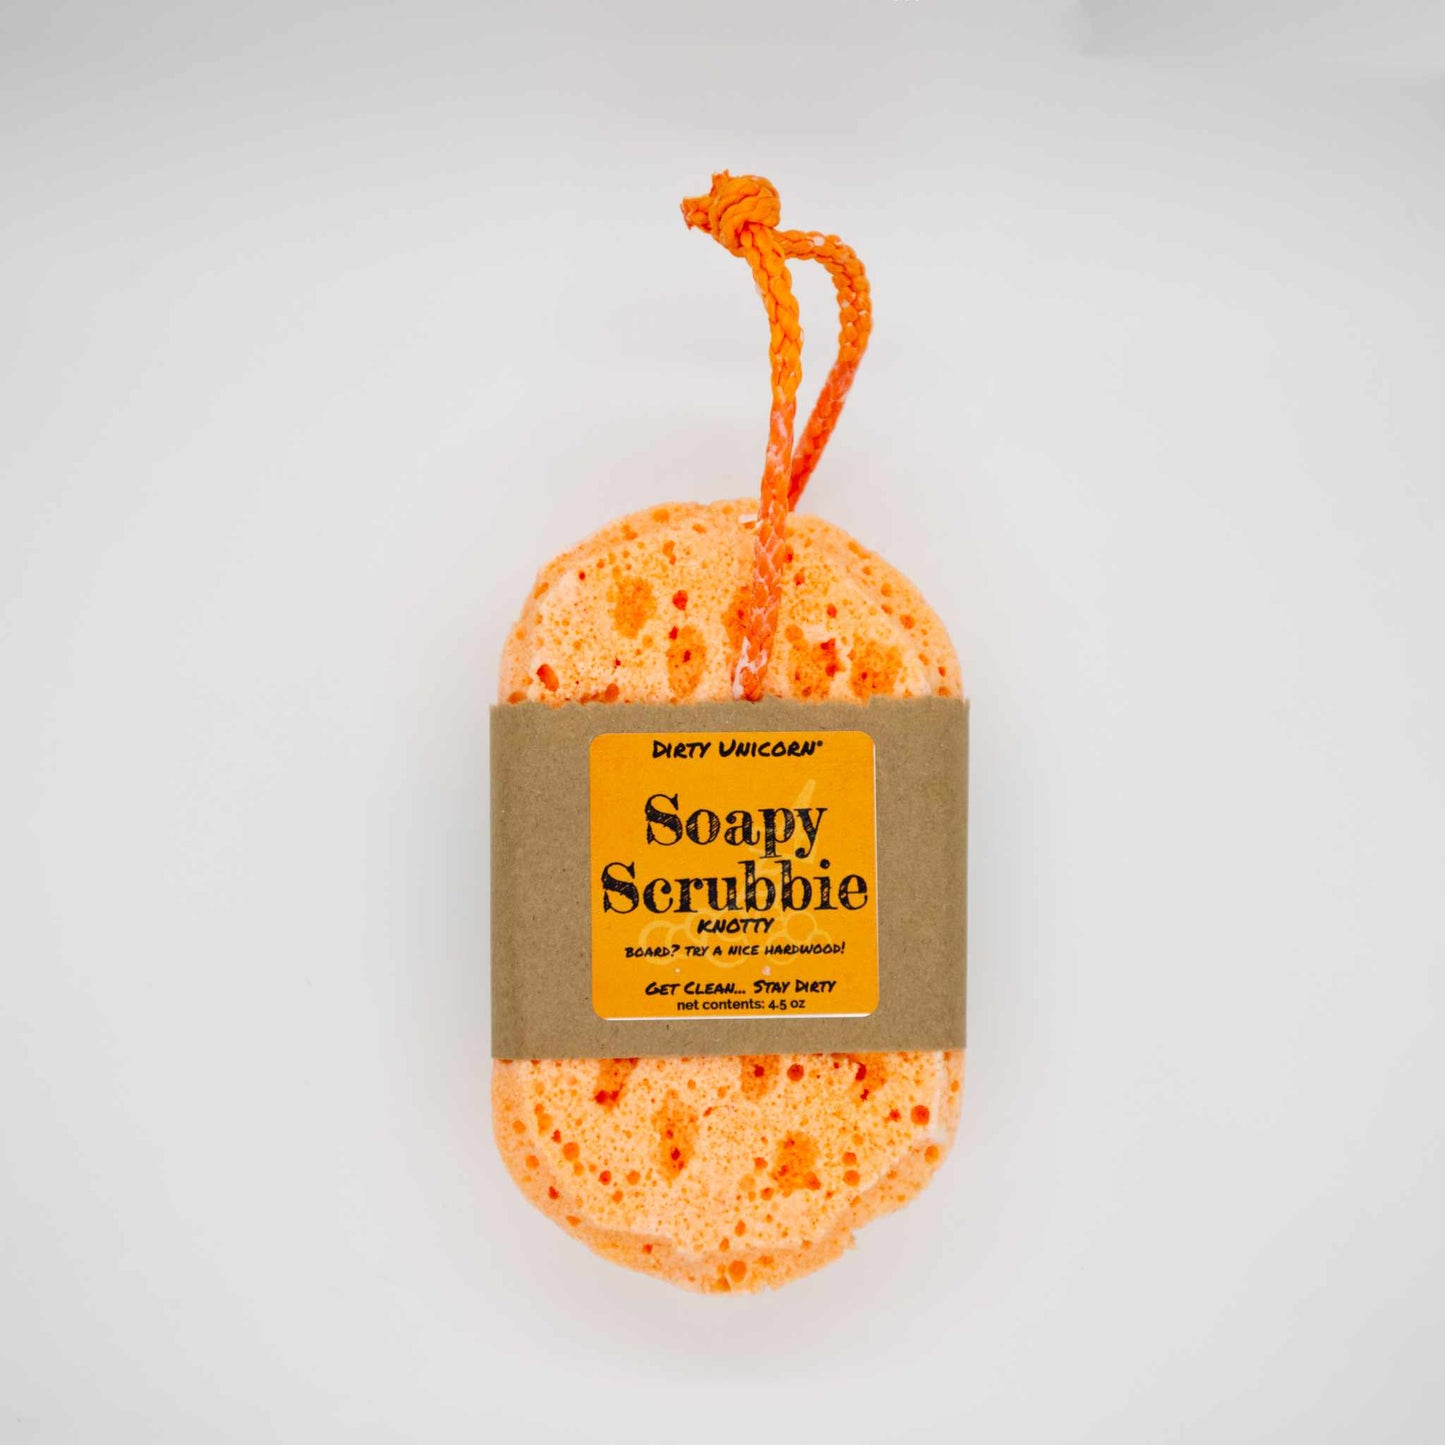 bright orange bath sponge with coordinating rope for hanging. on blank white background. Sponge is wrapped in brown Kraft paper belly band with an orange label barring product title